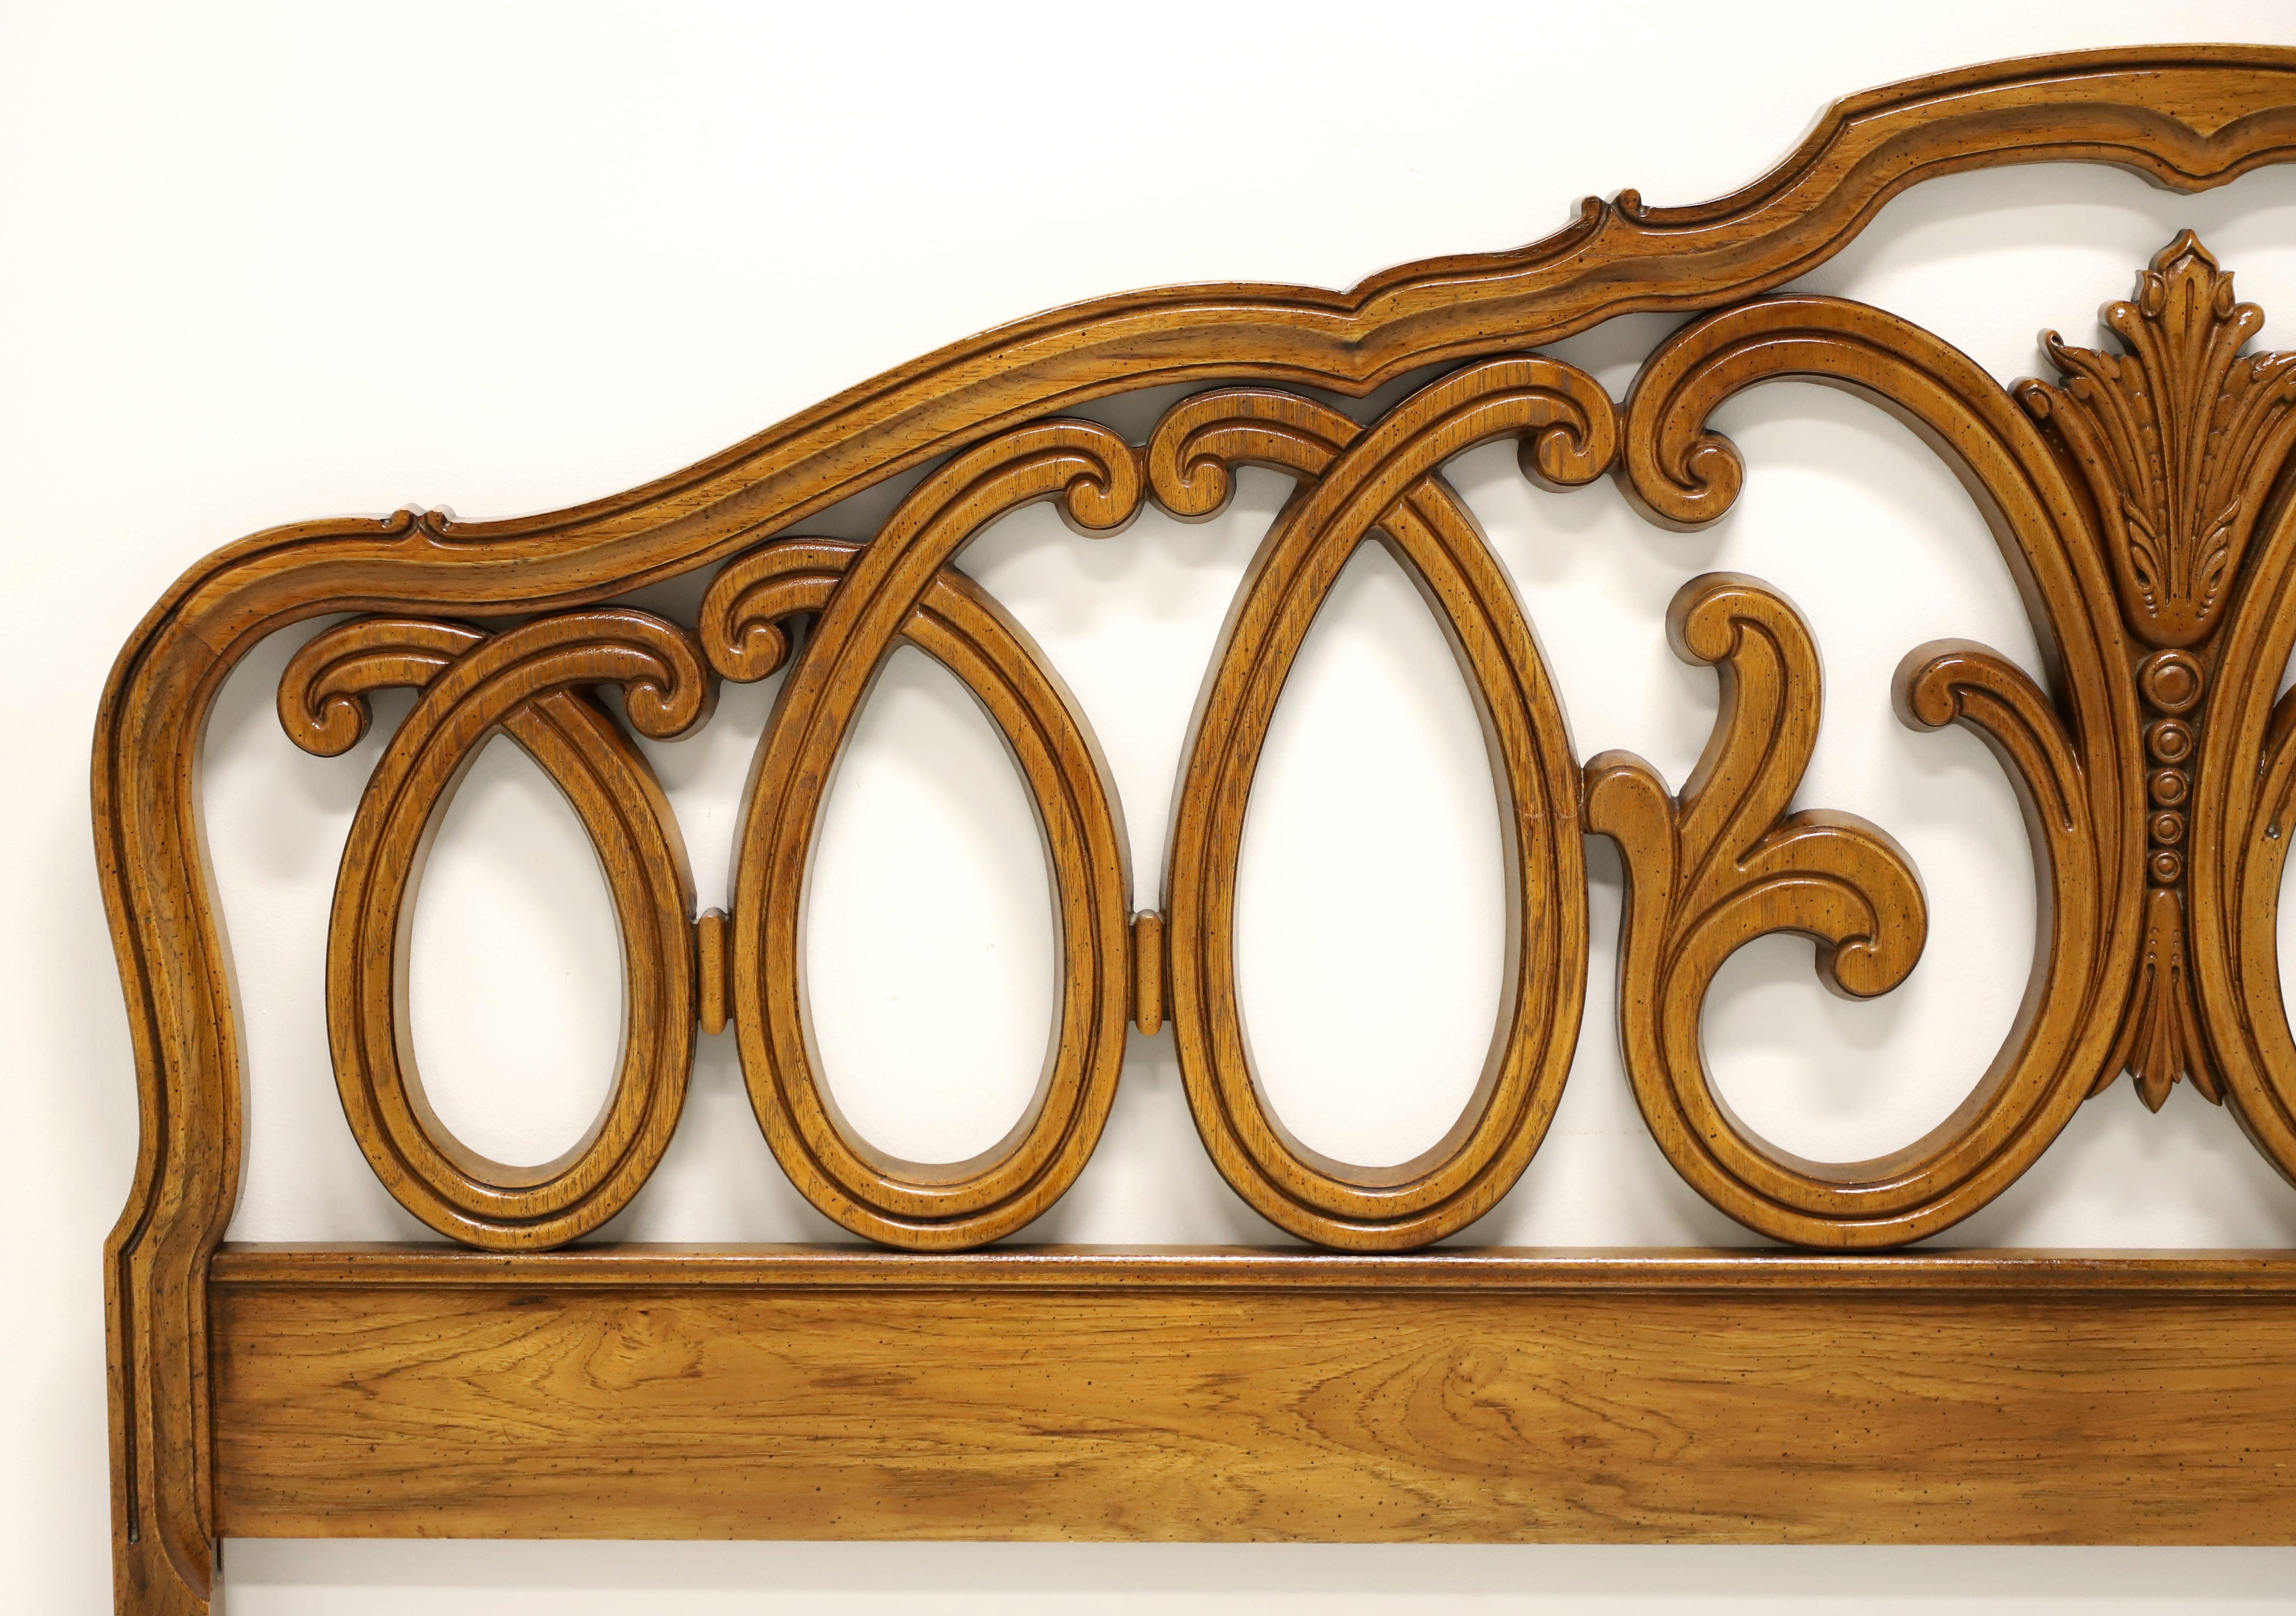 A French Country style king size headboard by Thomasville. Solid pecan, or similar nutwood, with arched top, decorative open carvings, and center carved foliate sheaf. Made in Thomasville, North Carolina, USA, circa 1971.

Style #: 